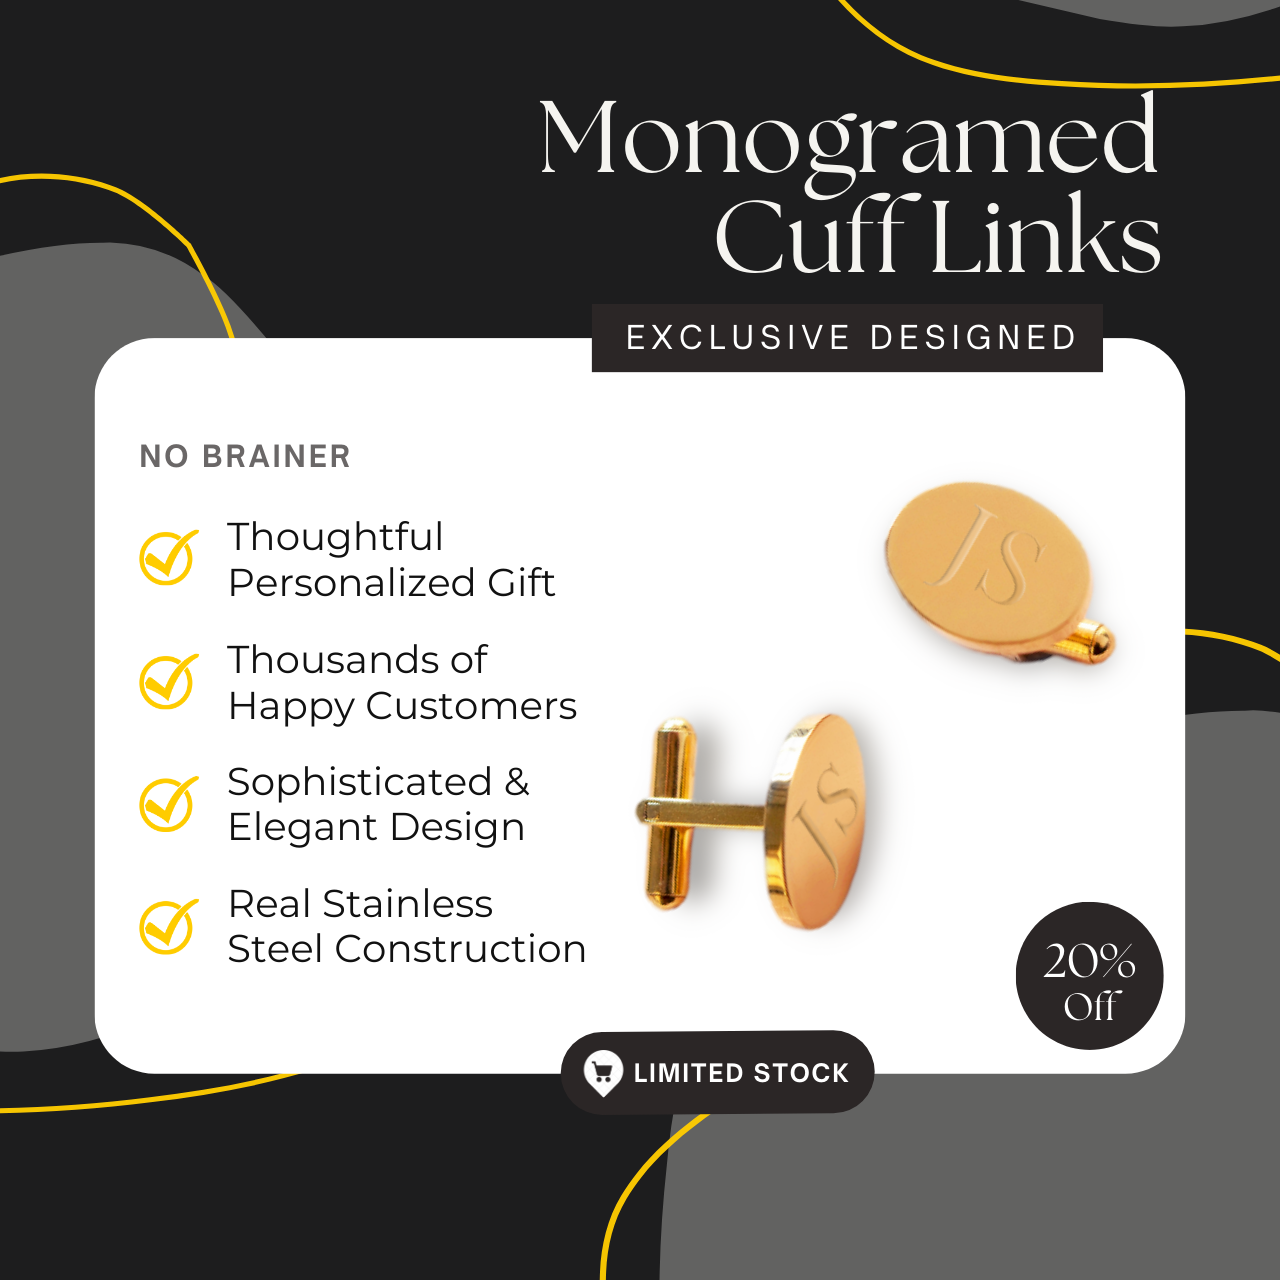 Oval Gold Plated Stainless Steel Cuff Links - Perfect for Groomsmen Gifts, Weddings, or Any Occasion